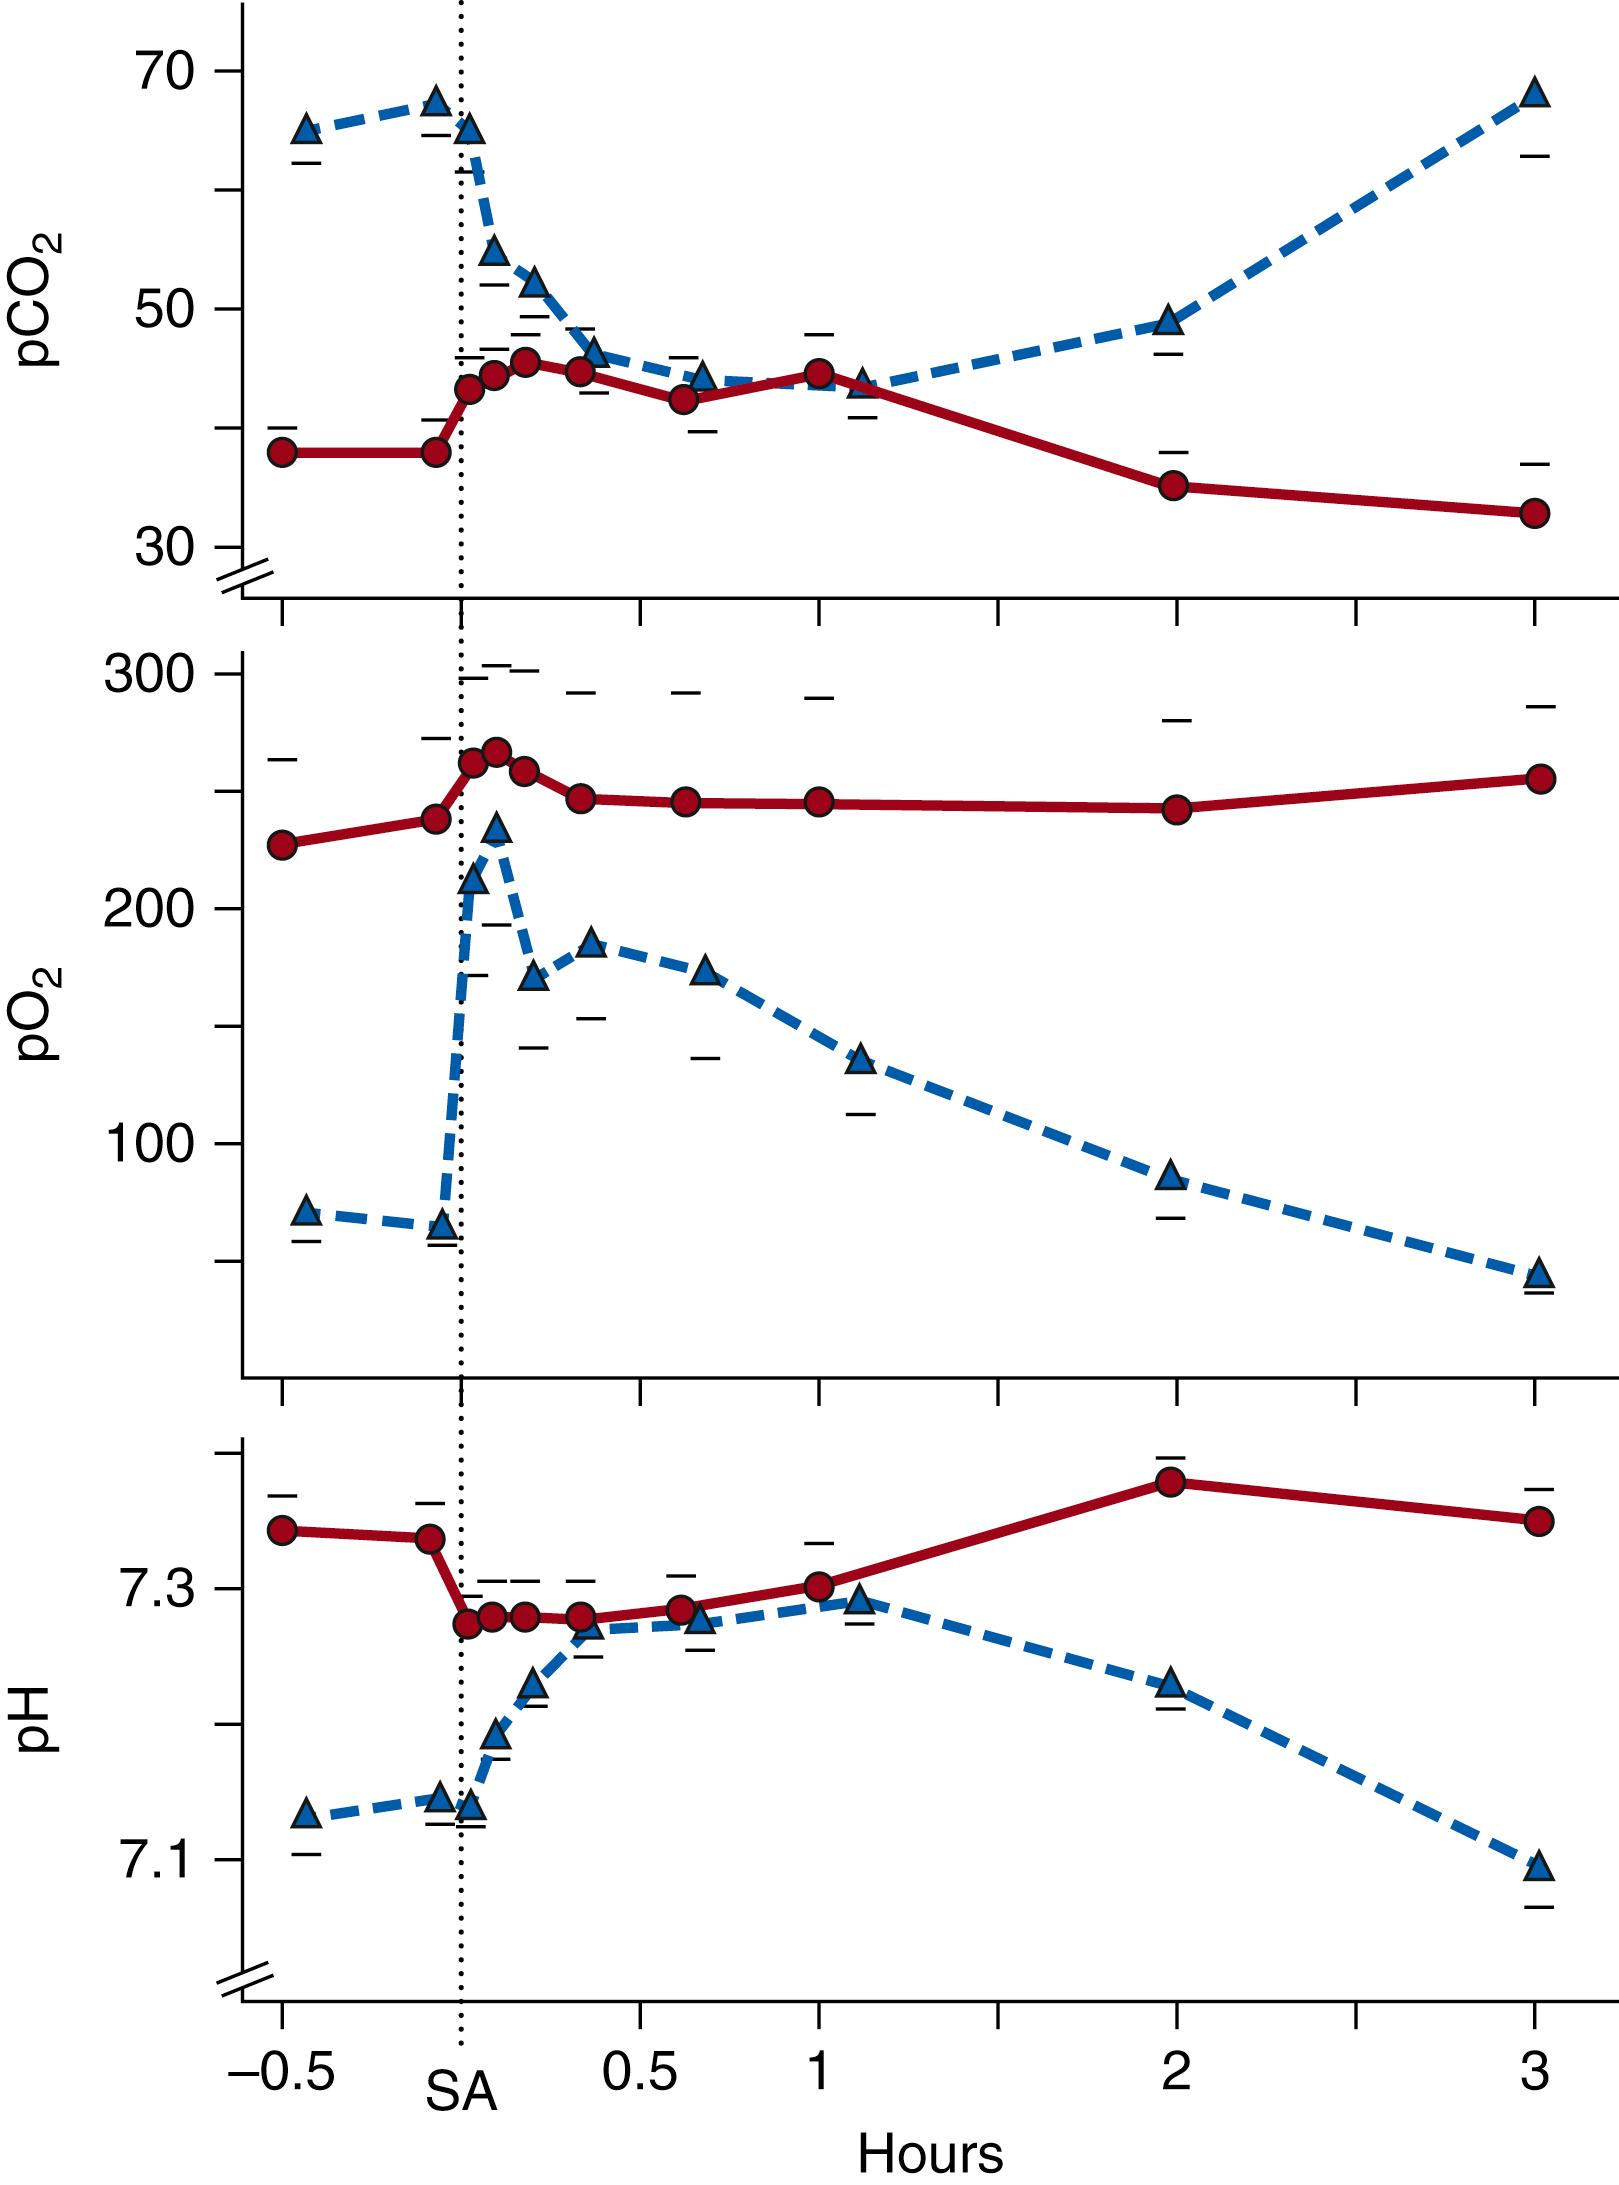 Fig. 79.5, Blood gas and pH responses of very preterm lambs to treatment with 100 mg/kg natural sheep surfactant from alveolar lavage. Preterm lambs were delivered at approximately 121 days of gestation (term is 150 days) and treated with surfactant either at birth (red dot) or after ventilation for approximately 30 minutes (SA) before surfactant treatment (blue triangle). Oxygenation was good and P co 2 values were normal with surfactant treatment at birth. Oxygenation improved very rapidly after surfactant treatment at 30 minutes of age, but the response did not persist because of lung injury from the initial period of ventilation before surfactant treatment.